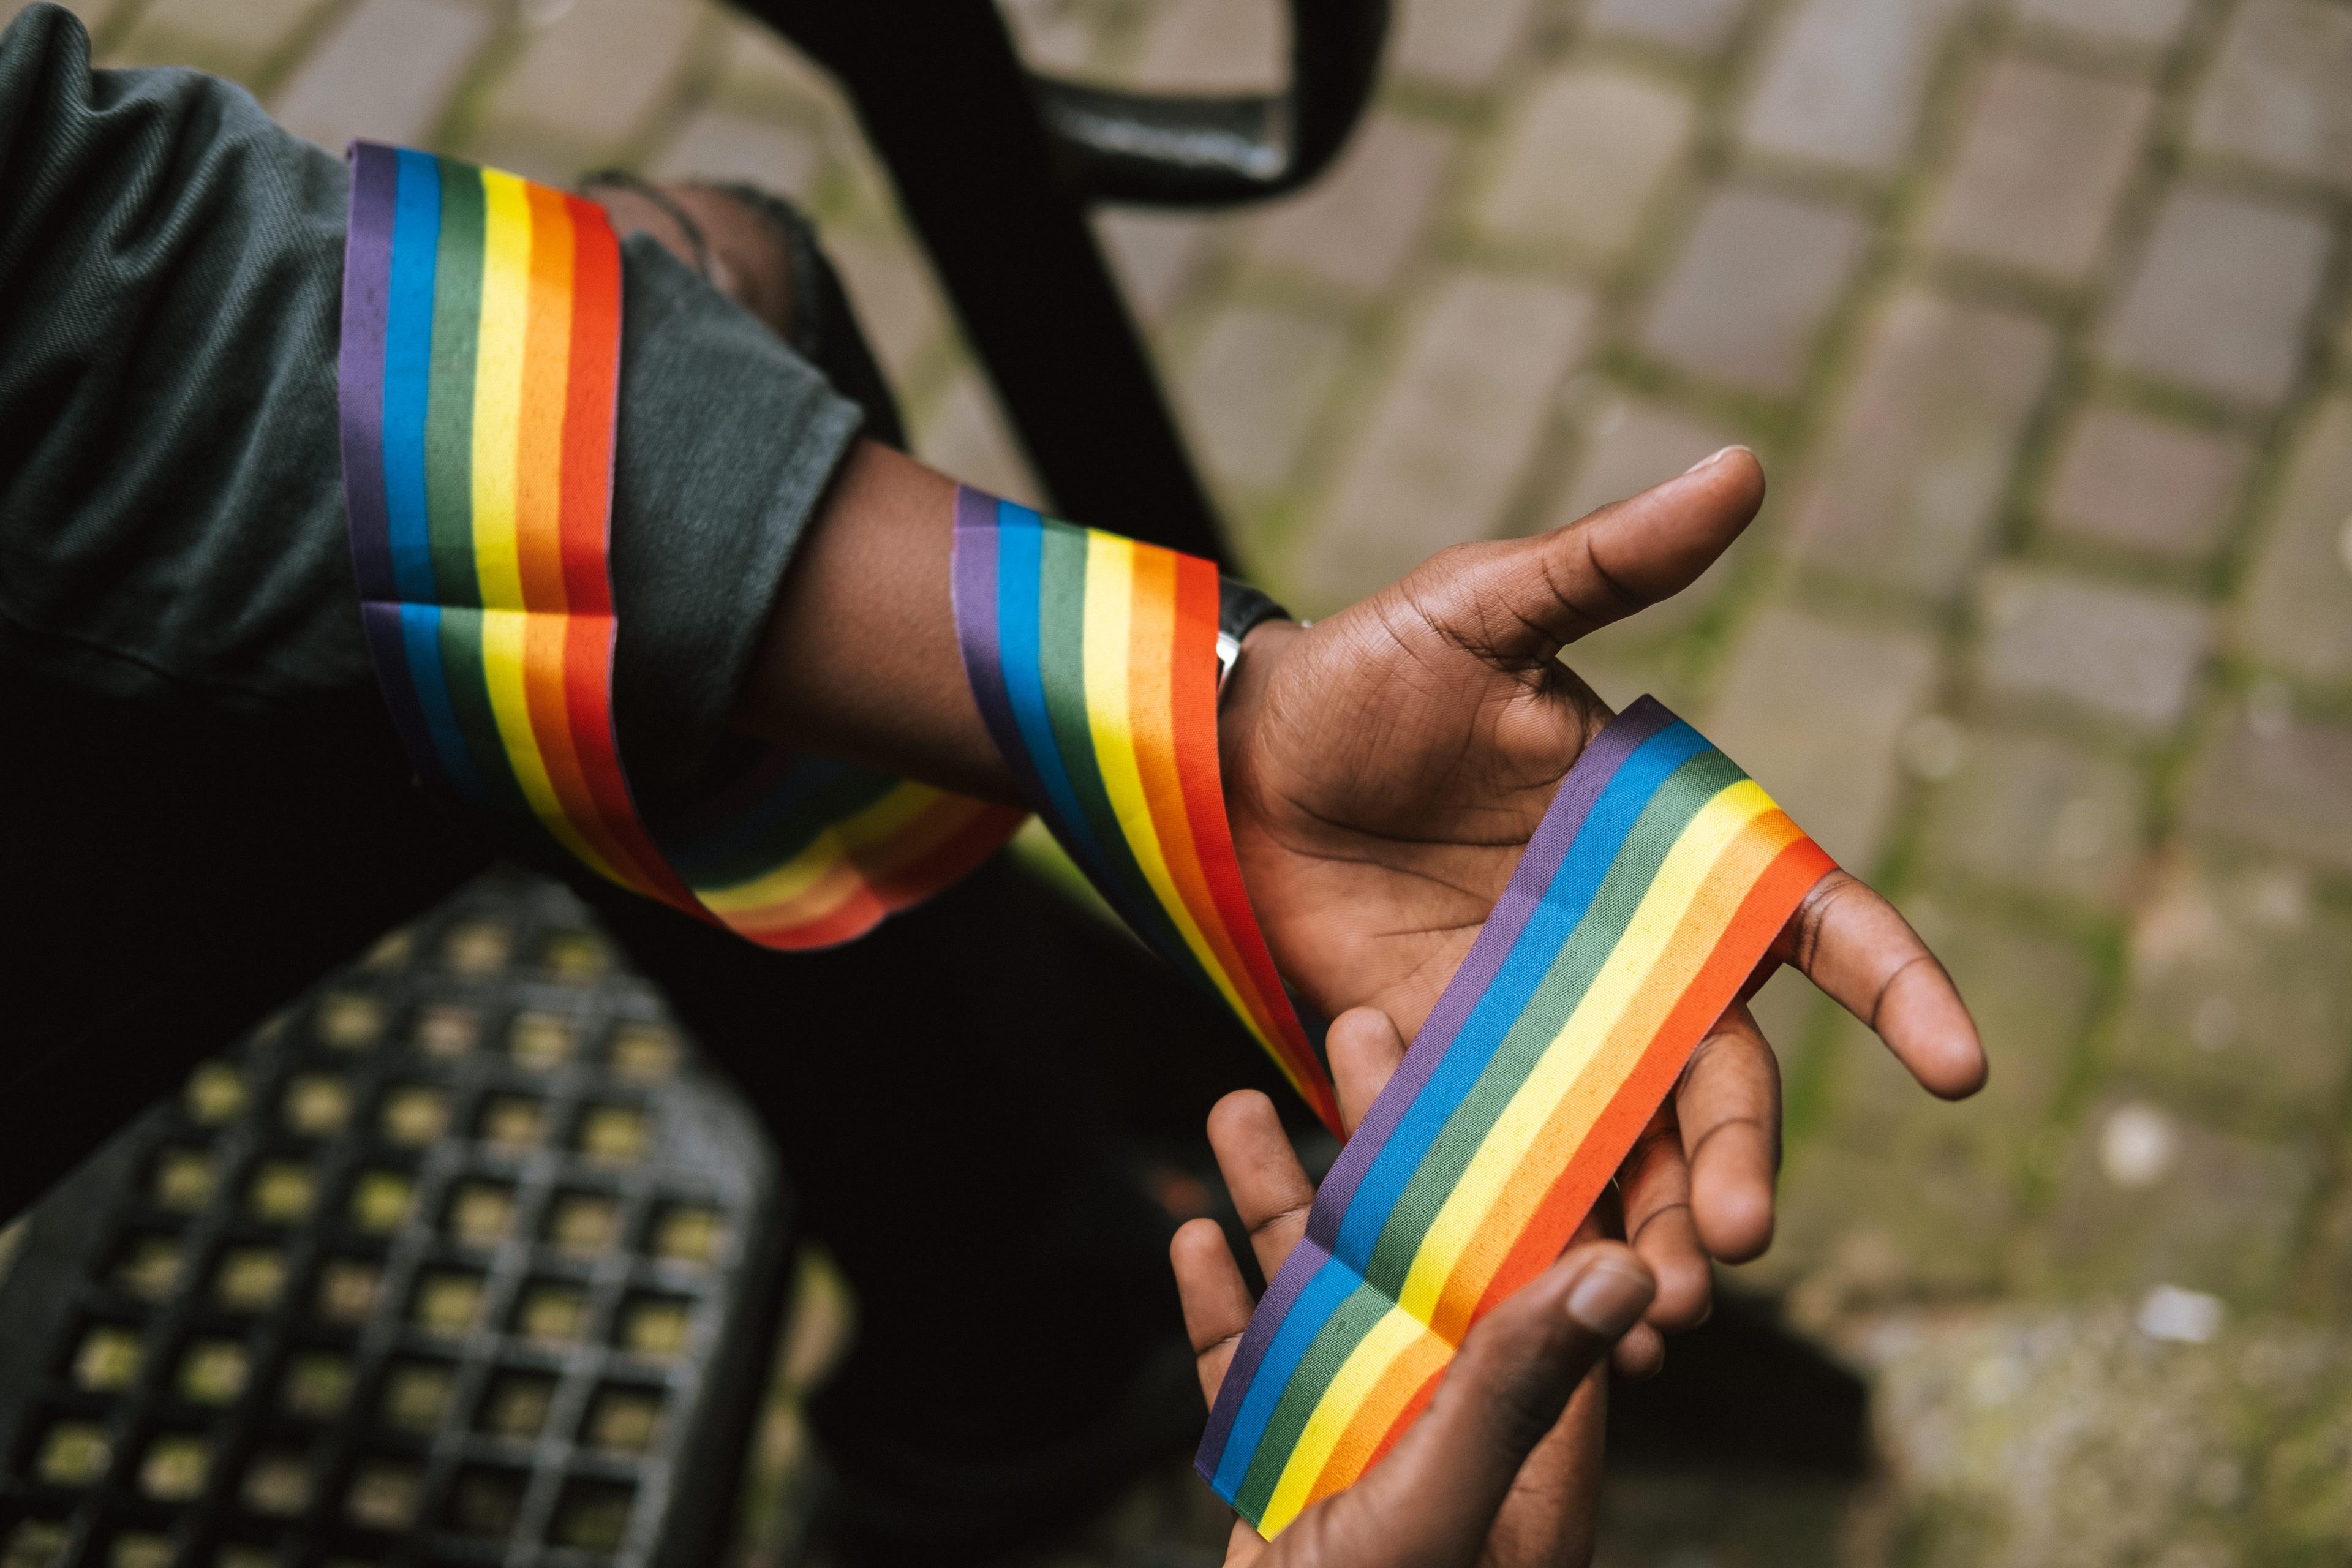 A Black person's arm and hand, wrapped in a rainbow ribbon